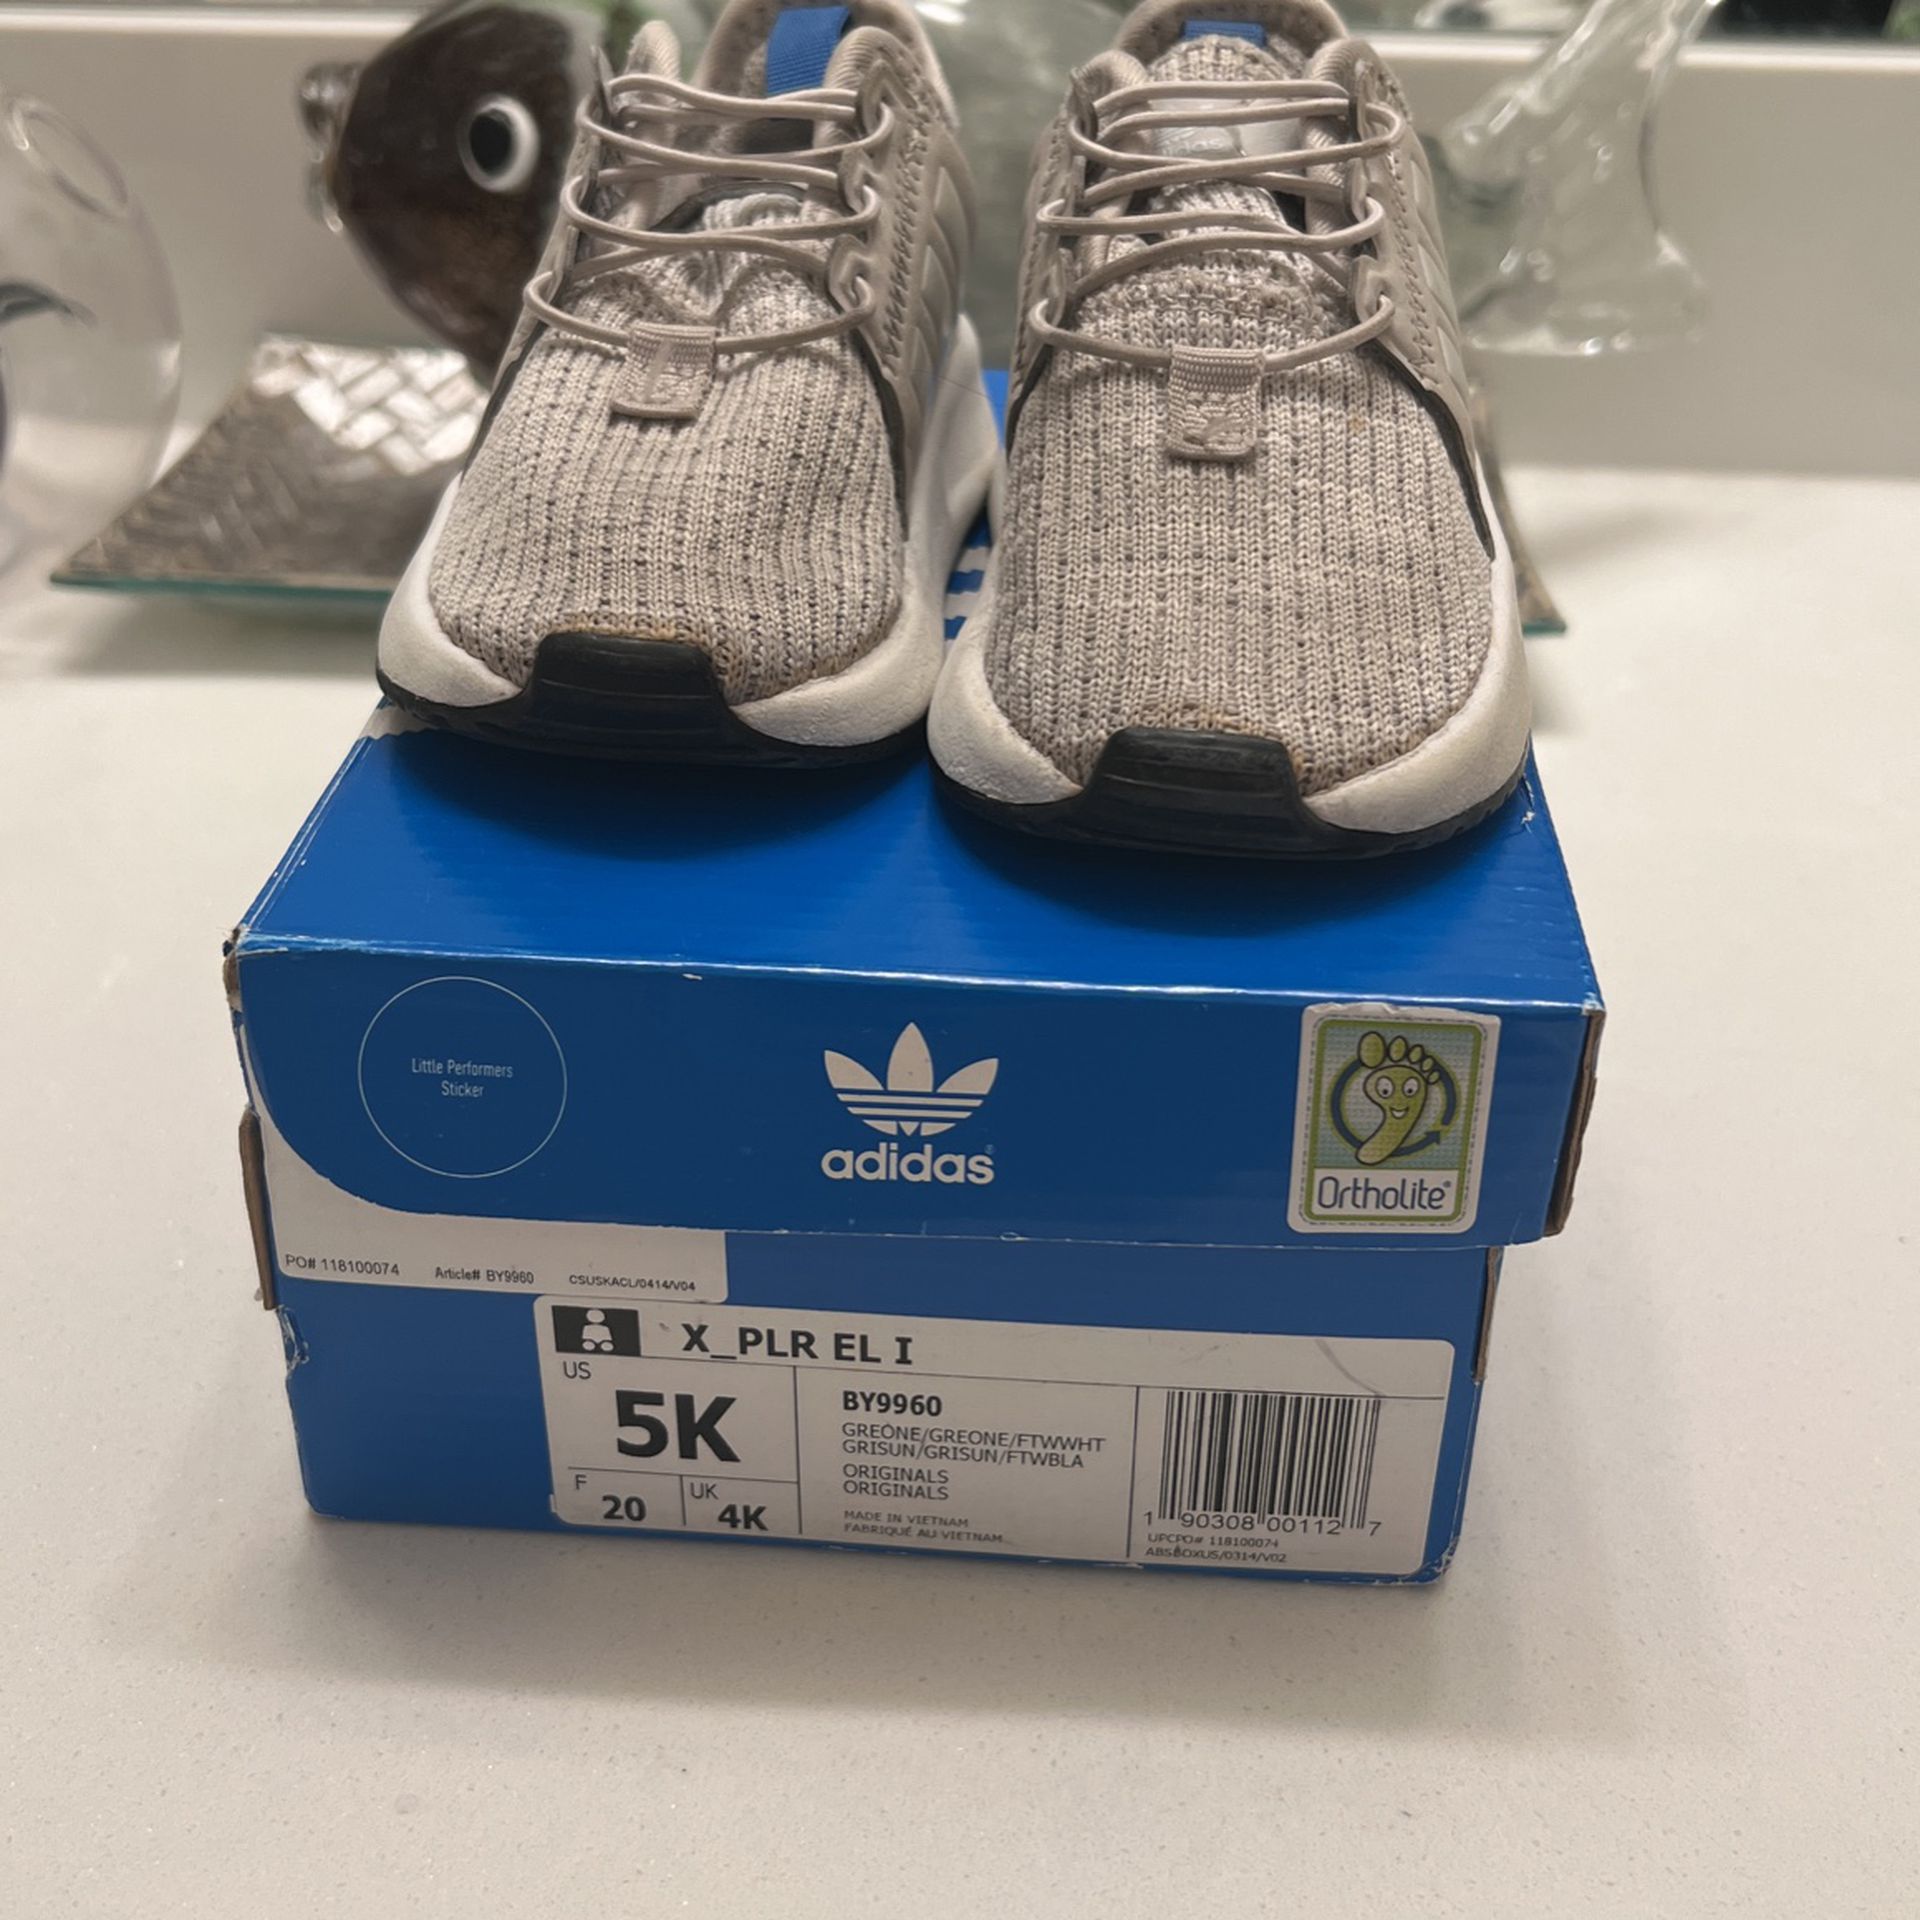 Adidas 5k for Sale in Fontana, CA - OfferUp